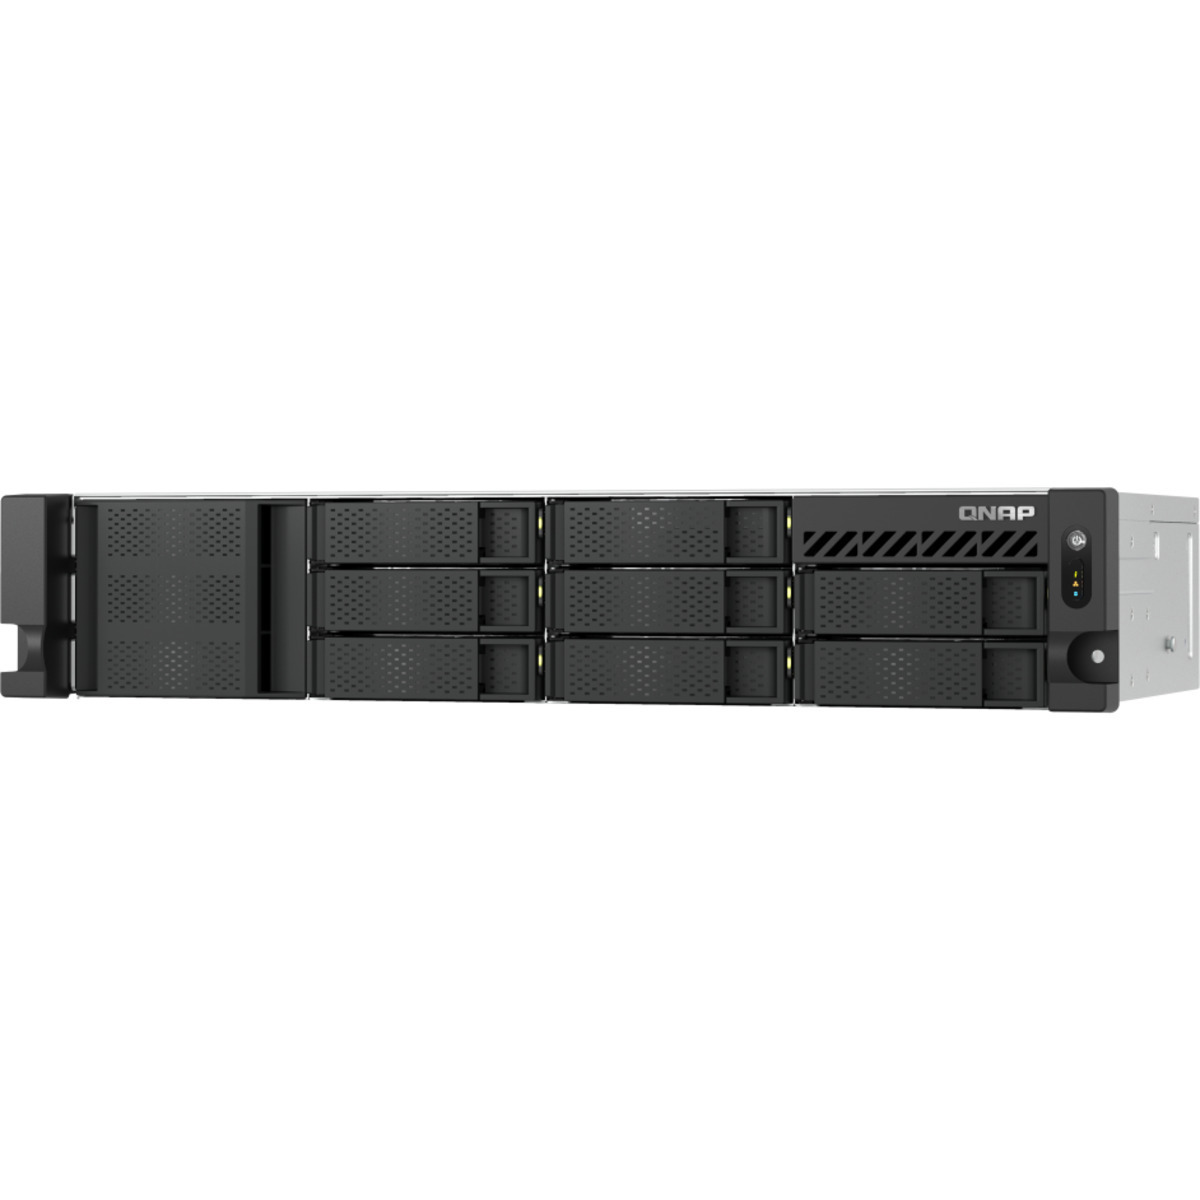 QNAP TS-855eU 8tb 8-Bay RackMount Multimedia / Power User / Business NAS - Network Attached Storage Device 4x2tb Western Digital Red SA500 WDS200T1R0A 2.5 560/530MB/s SATA 6Gb/s SSD NAS Class Drives Installed - Burn-In Tested - FREE RAM UPGRADE TS-855eU